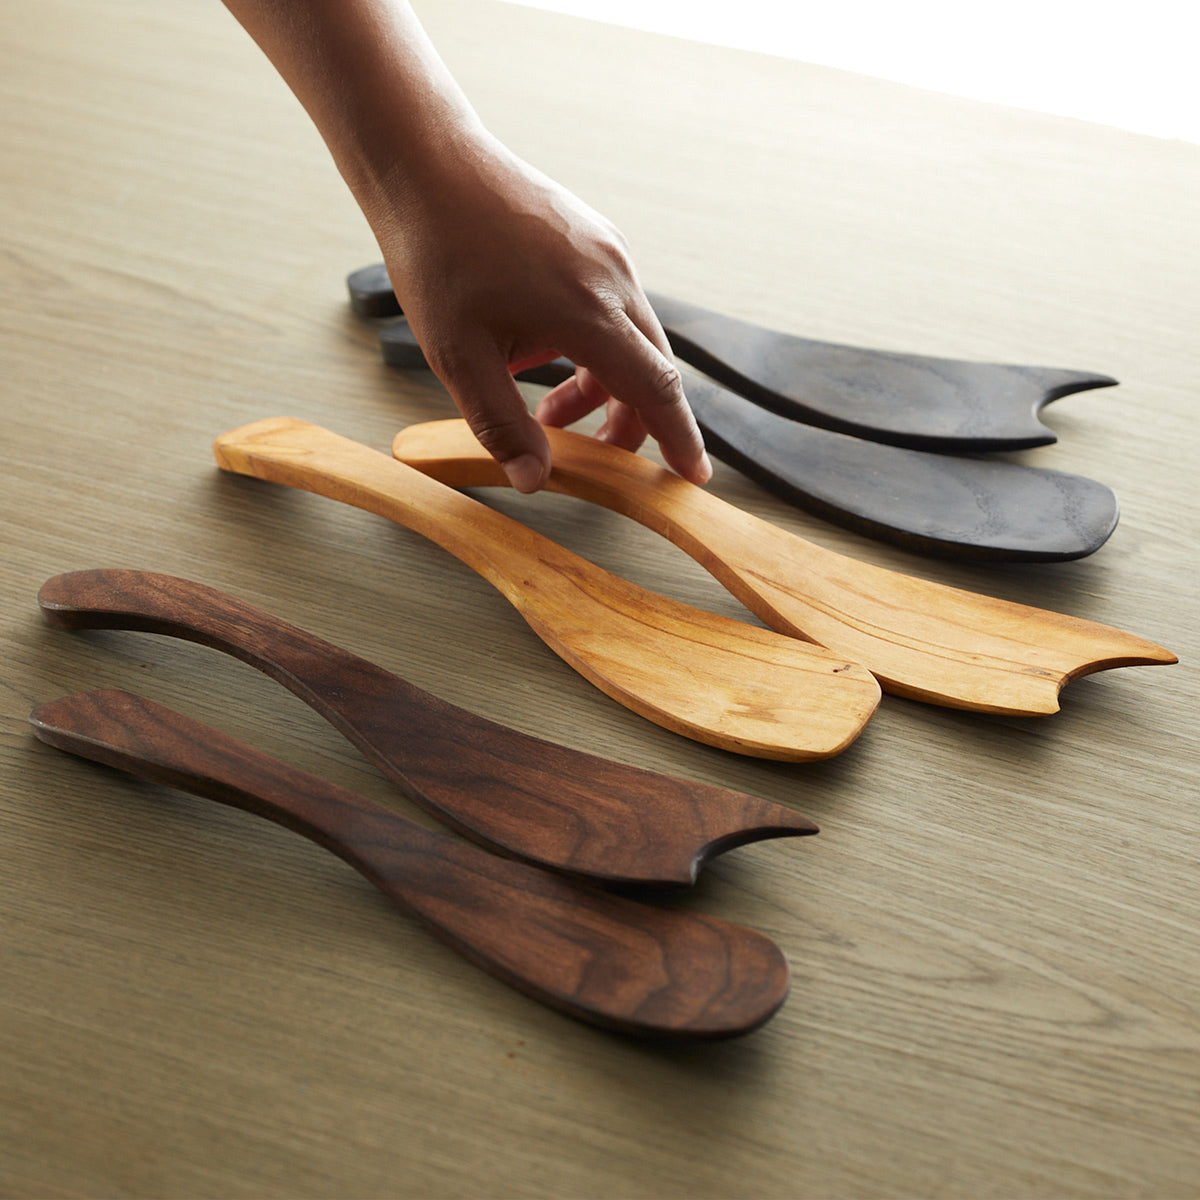 Four Black Walnut Handcrafted Salad Tossers crafted by an artisan woodworker, neatly arranged on a table.